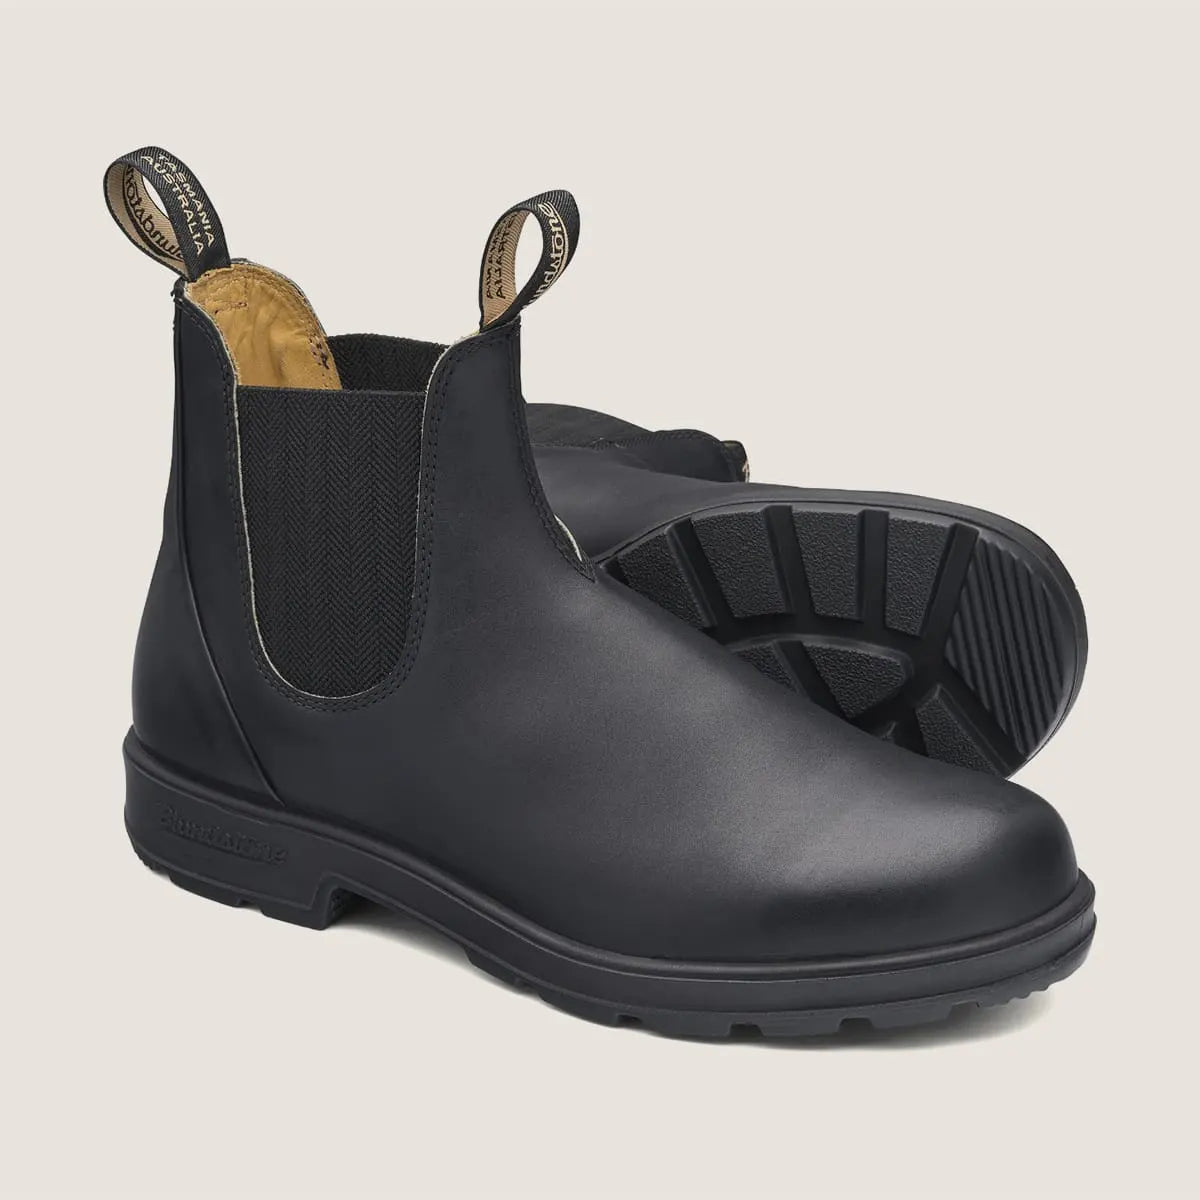 Blundstone 610 Elastic Sided Work Boots in Black